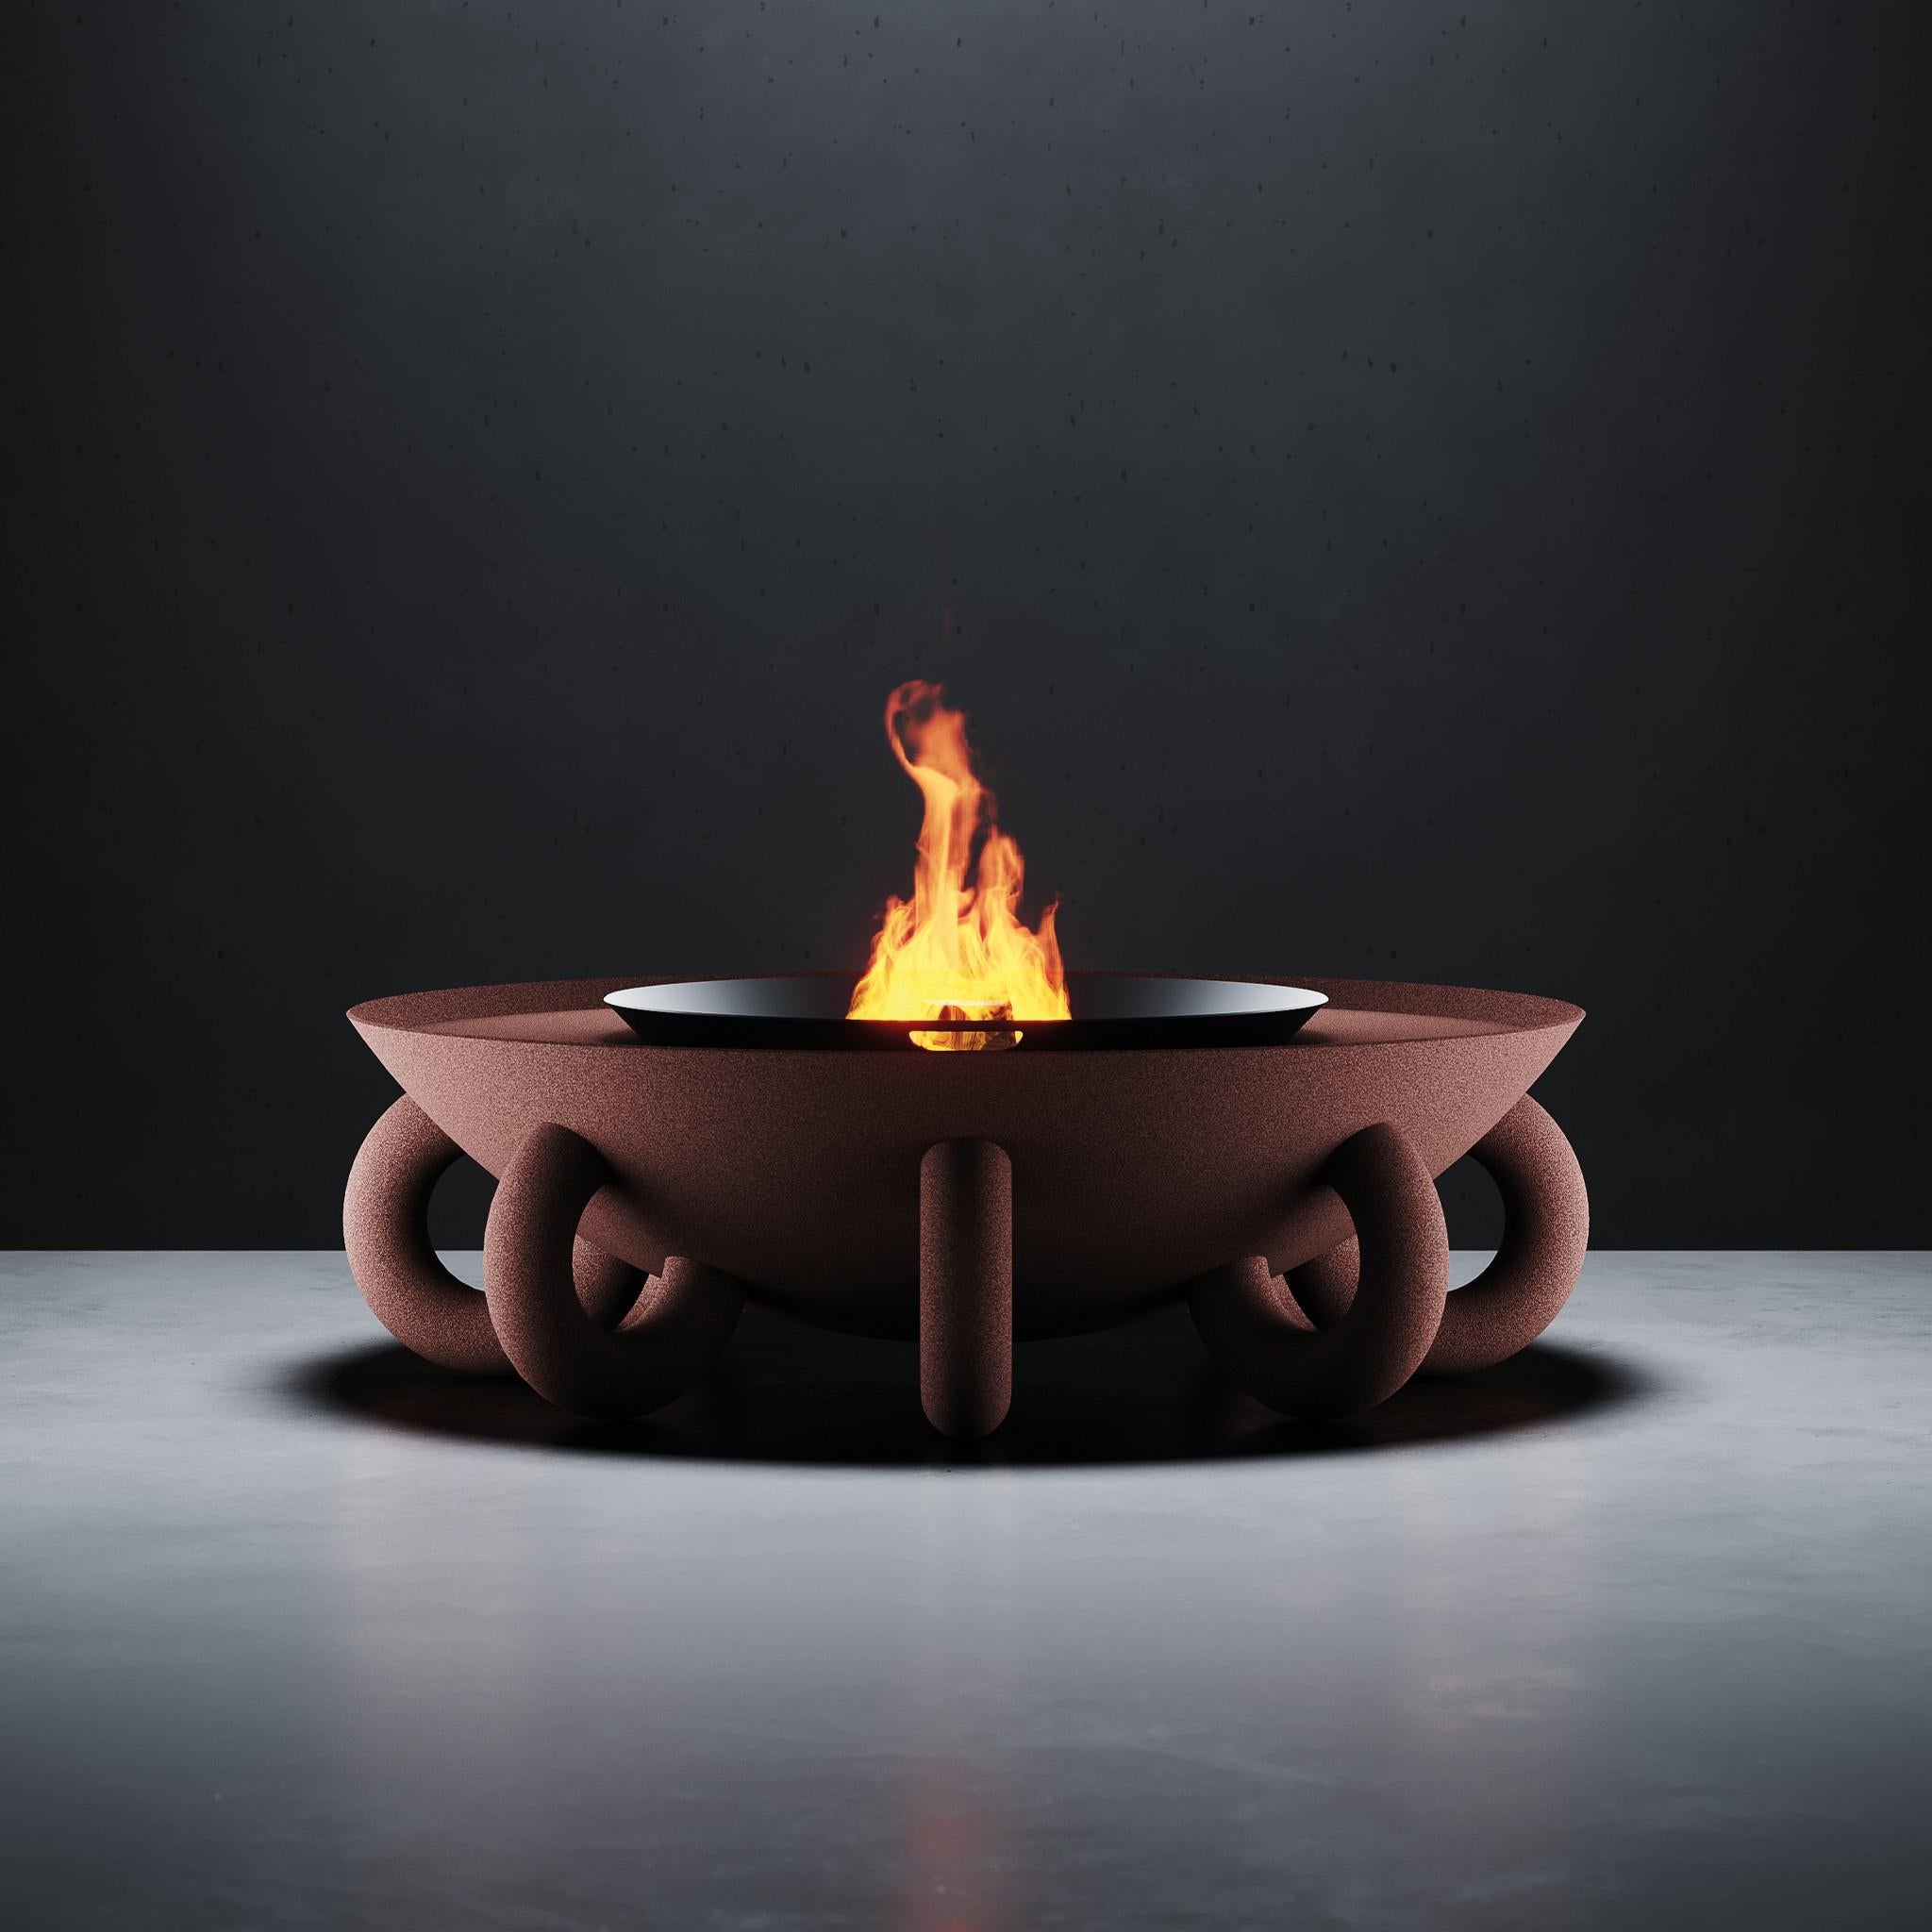 Kalam Fire Pit is a freestanding modern fire pit, that will fit perfectly in a modern outdoor design project. Kalam creates another expression of outdoor living with a design resembling a work of art, crafted to outset a cozy atmosphere and